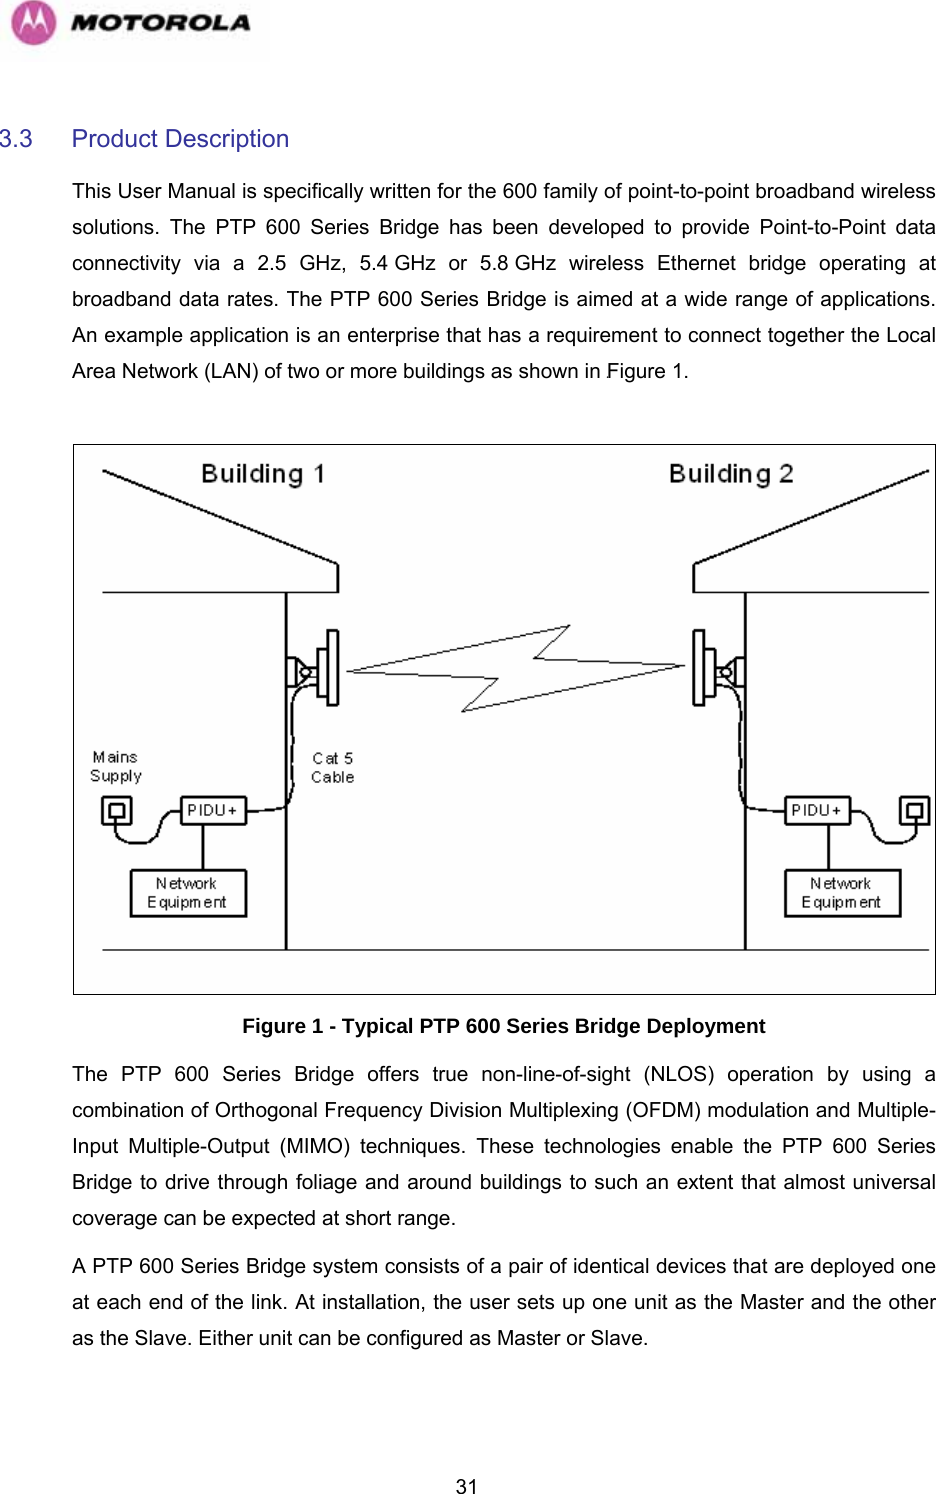   313.3 Product Description This User Manual is specifically written for the 600 family of point-to-point broadband wireless solutions. The PTP 600 Series Bridge has been developed to provide Point-to-Point data connectivity via a 2.5 GHz, 5.4 GHz or 5.8 GHz wireless Ethernet bridge operating at broadband data rates. The PTP 600 Series Bridge is aimed at a wide range of applications. An example application is an enterprise that has a requirement to connect together the Local Area Network (LAN) of two or more buildings as shown in 964HFigure 1.    Figure 1 - Typical PTP 600 Series Bridge Deployment The PTP 600 Series Bridge offers true non-line-of-sight (NLOS) operation by using a combination of Orthogonal Frequency Division Multiplexing (OFDM) modulation and Multiple-Input Multiple-Output (MIMO) techniques. These technologies enable the PTP 600 Series Bridge to drive through foliage and around buildings to such an extent that almost universal coverage can be expected at short range.  A PTP 600 Series Bridge system consists of a pair of identical devices that are deployed one at each end of the link. At installation, the user sets up one unit as the Master and the other as the Slave. Either unit can be configured as Master or Slave.  